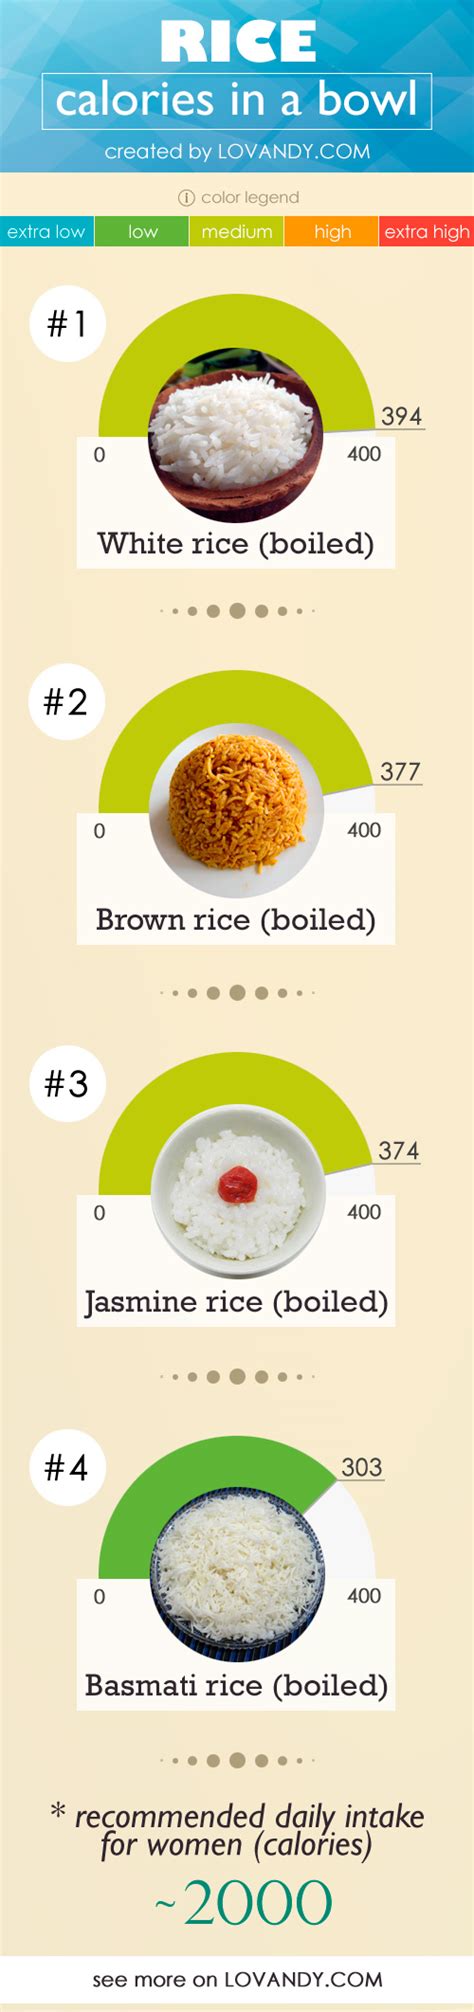 Calories in basmati rice. Explore the nutritional differences between Basmati and Jasmine rice, including their health benefits and best culinary uses. ... 1 cup of jasmine rice provides 205 calories and 4.5 grams of protein. The 45g carbohydrates in jasmine contain 0.6 g of fiber and 0.1 g of sugars. The aromatic jasmine rice is low in total fats providing about 0.4 g ... 